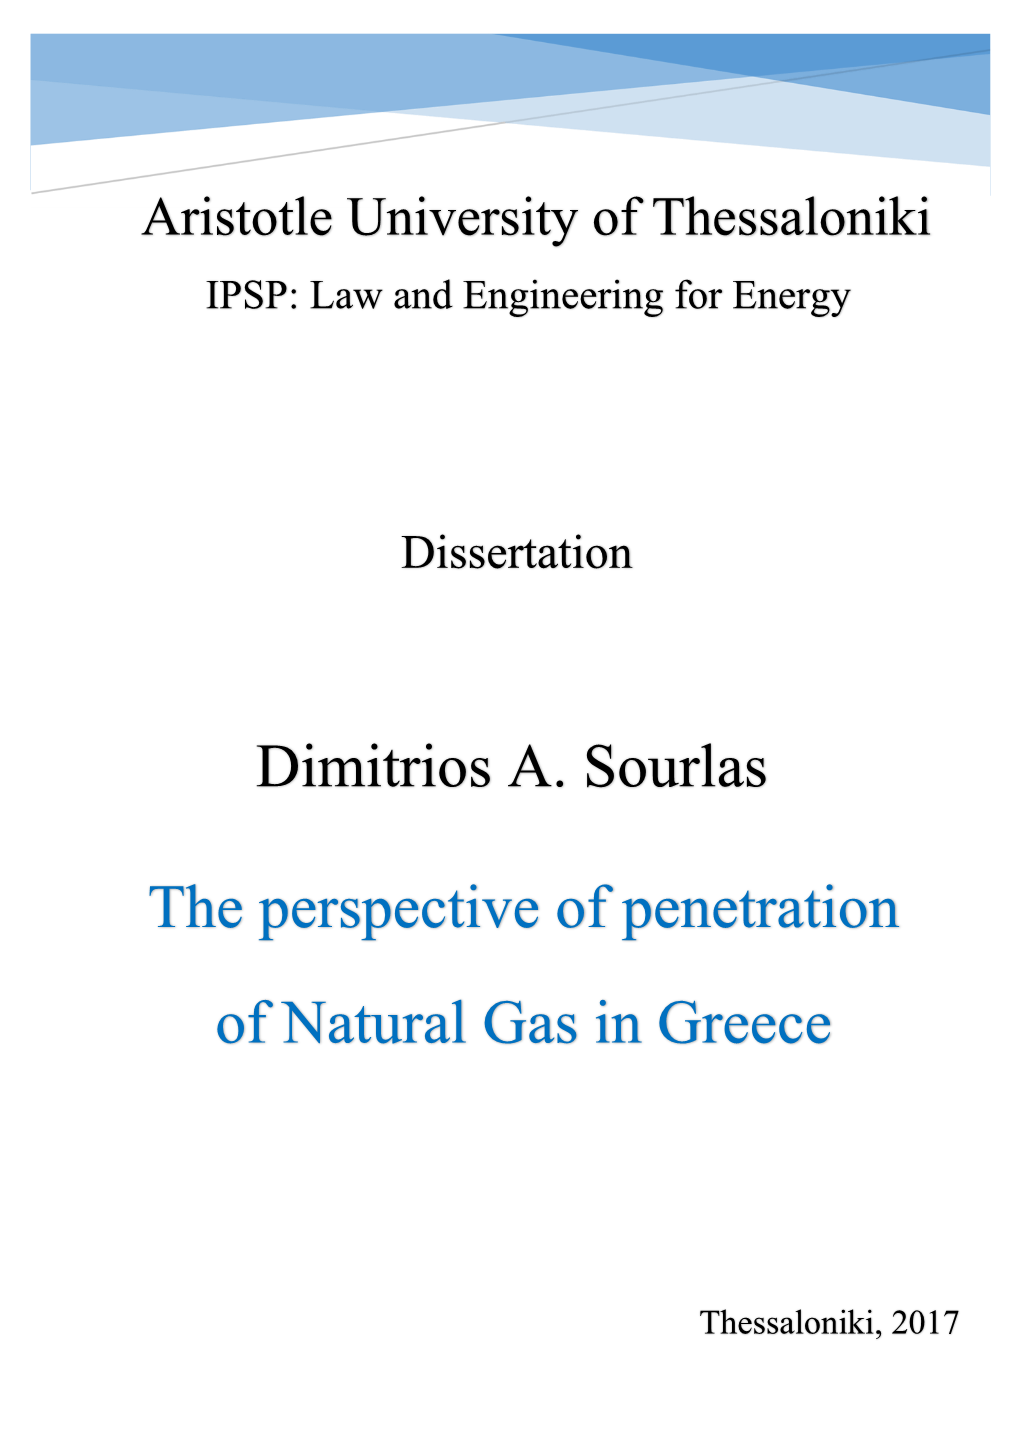 The Perspective of Penetration of Natural Gas in Greece